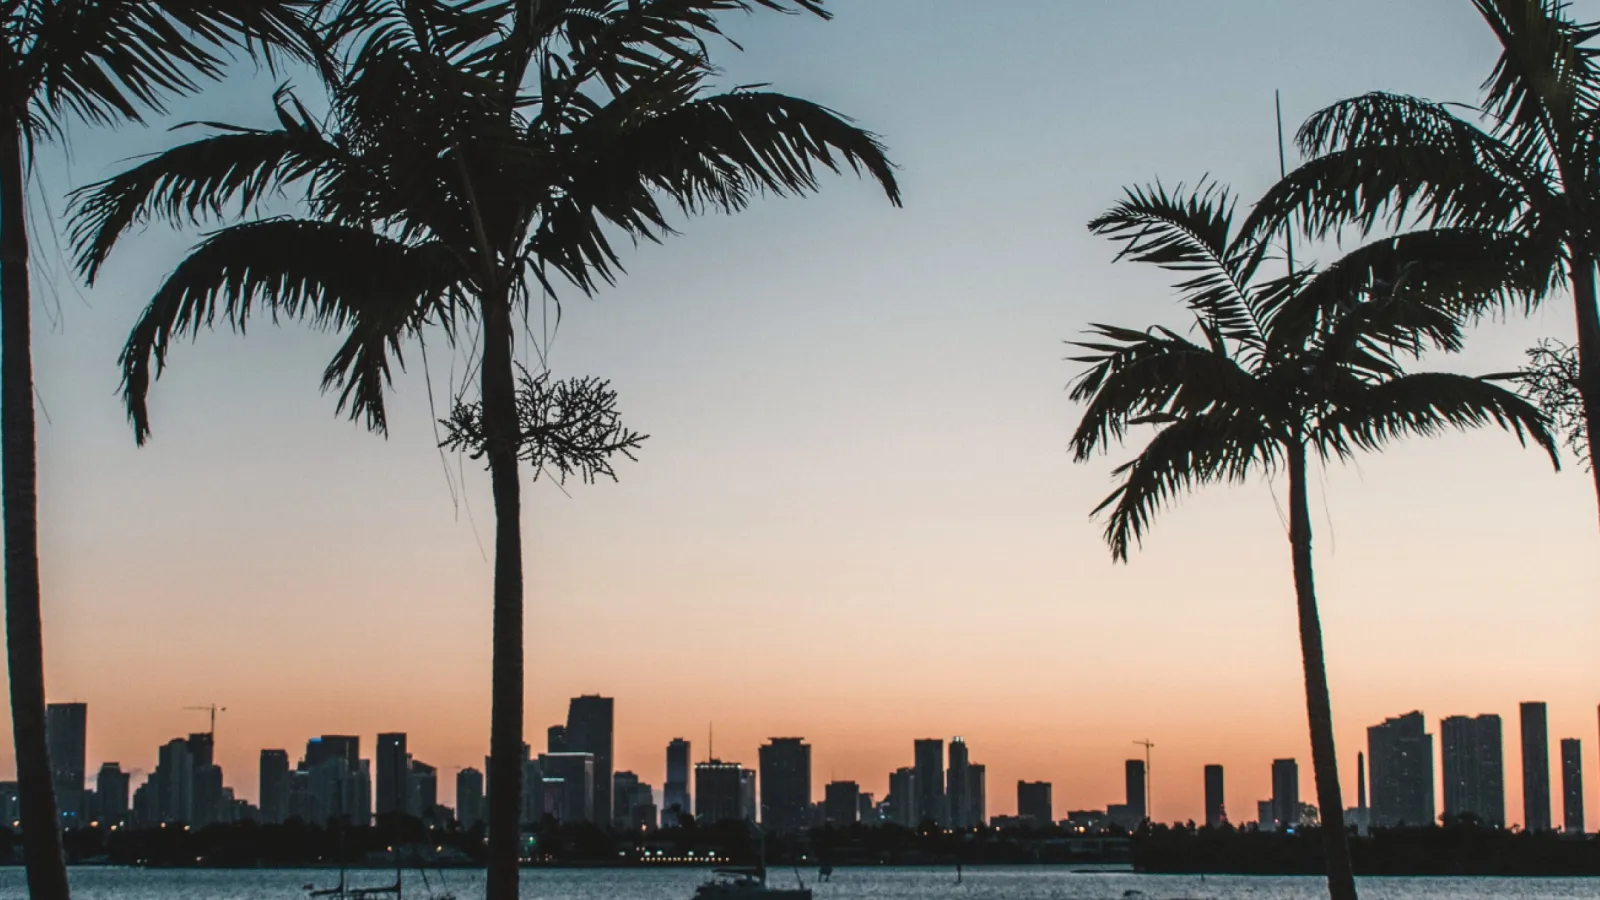 a group of palm trees next to a body of water and a city